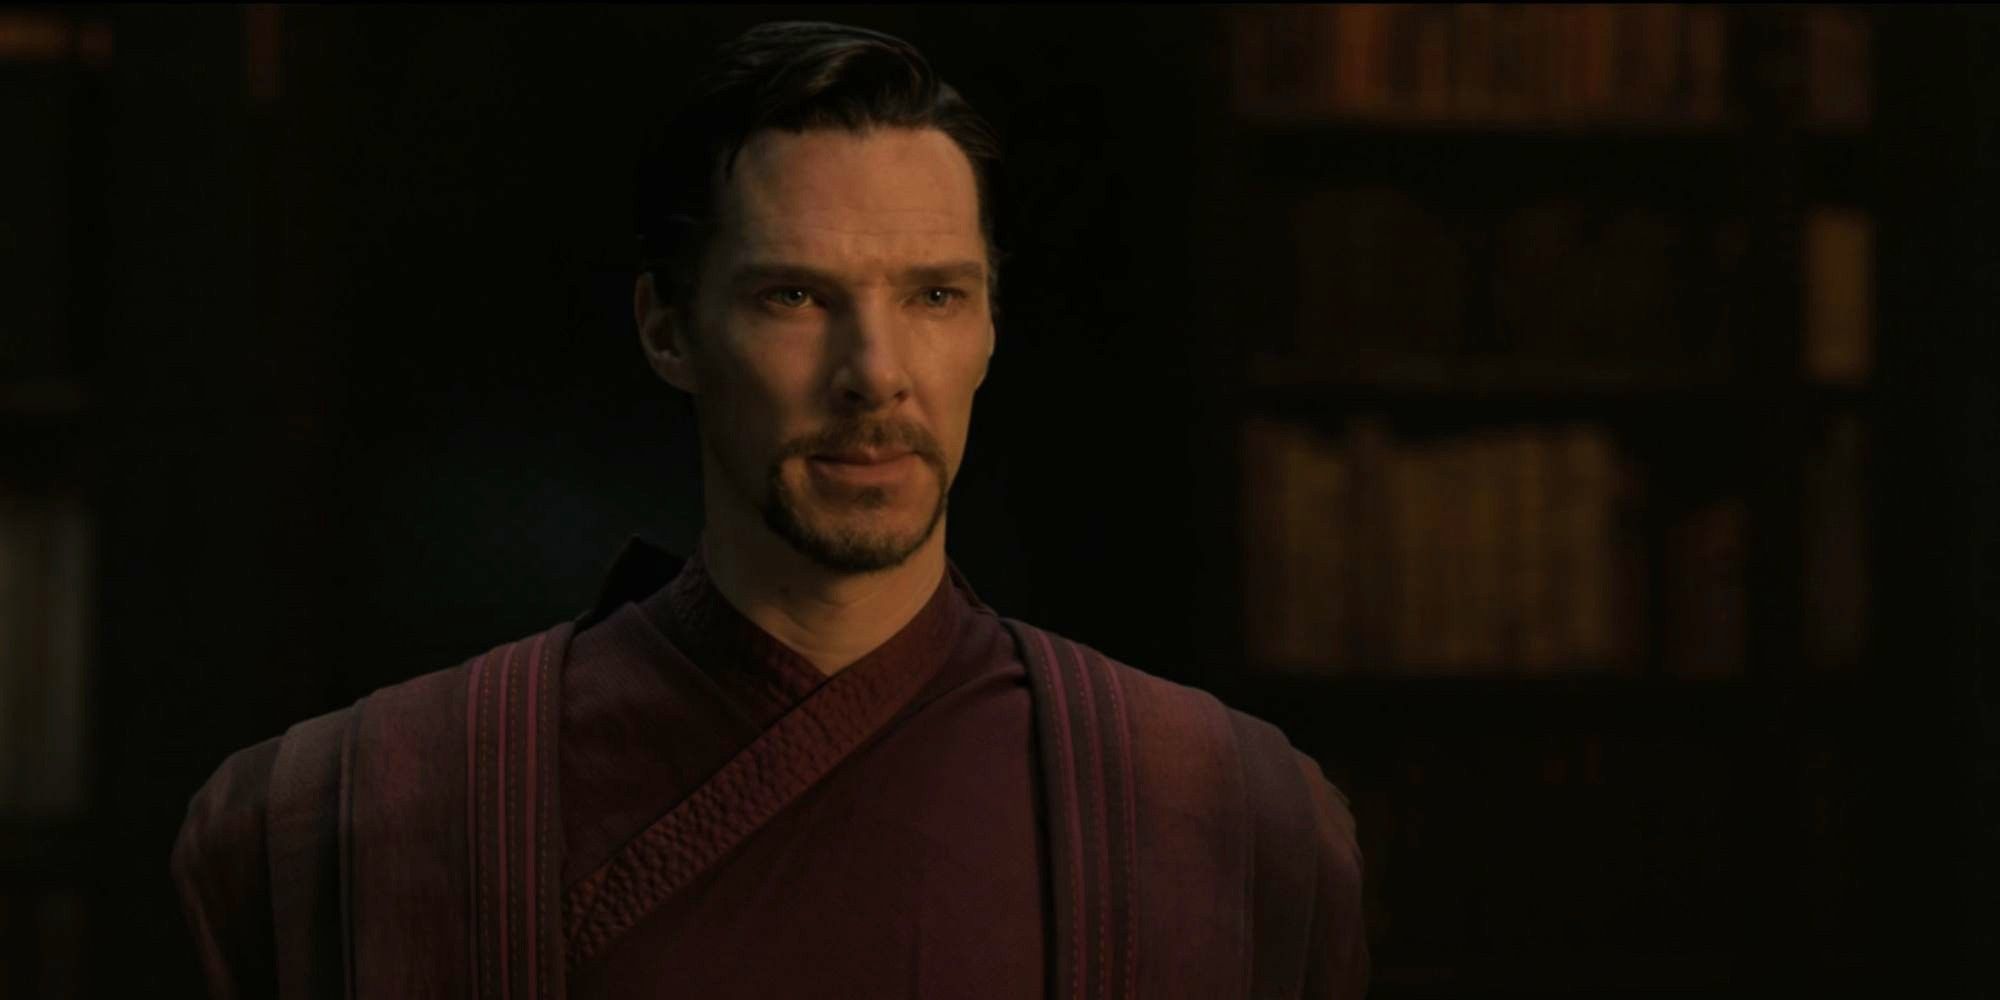 Stephen Strange standing still and looking serious in Doctor Strange.